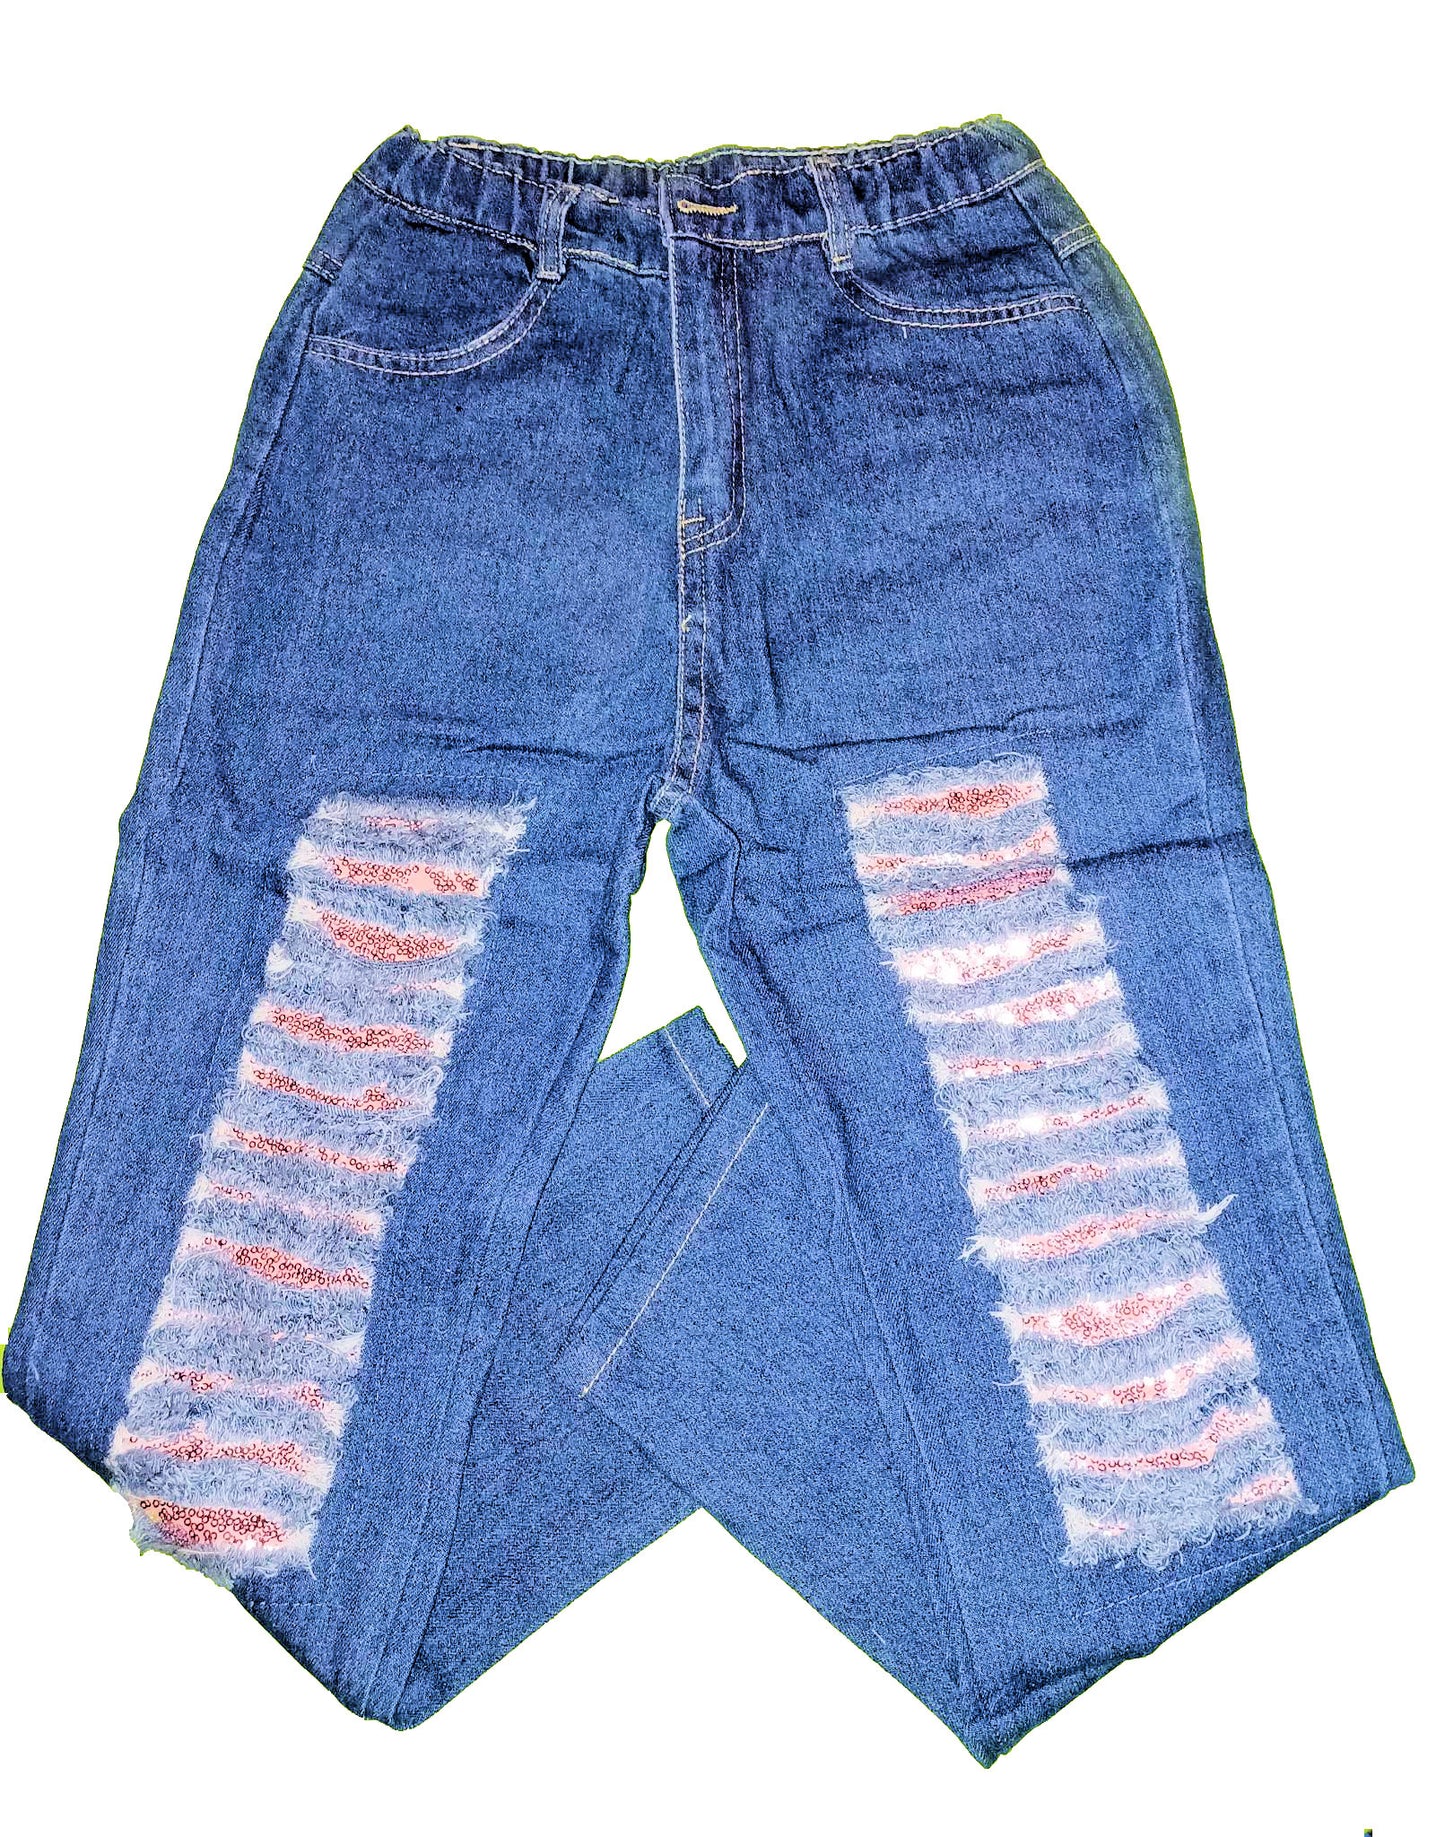 Blue Jeans with Pink Sequin Patches